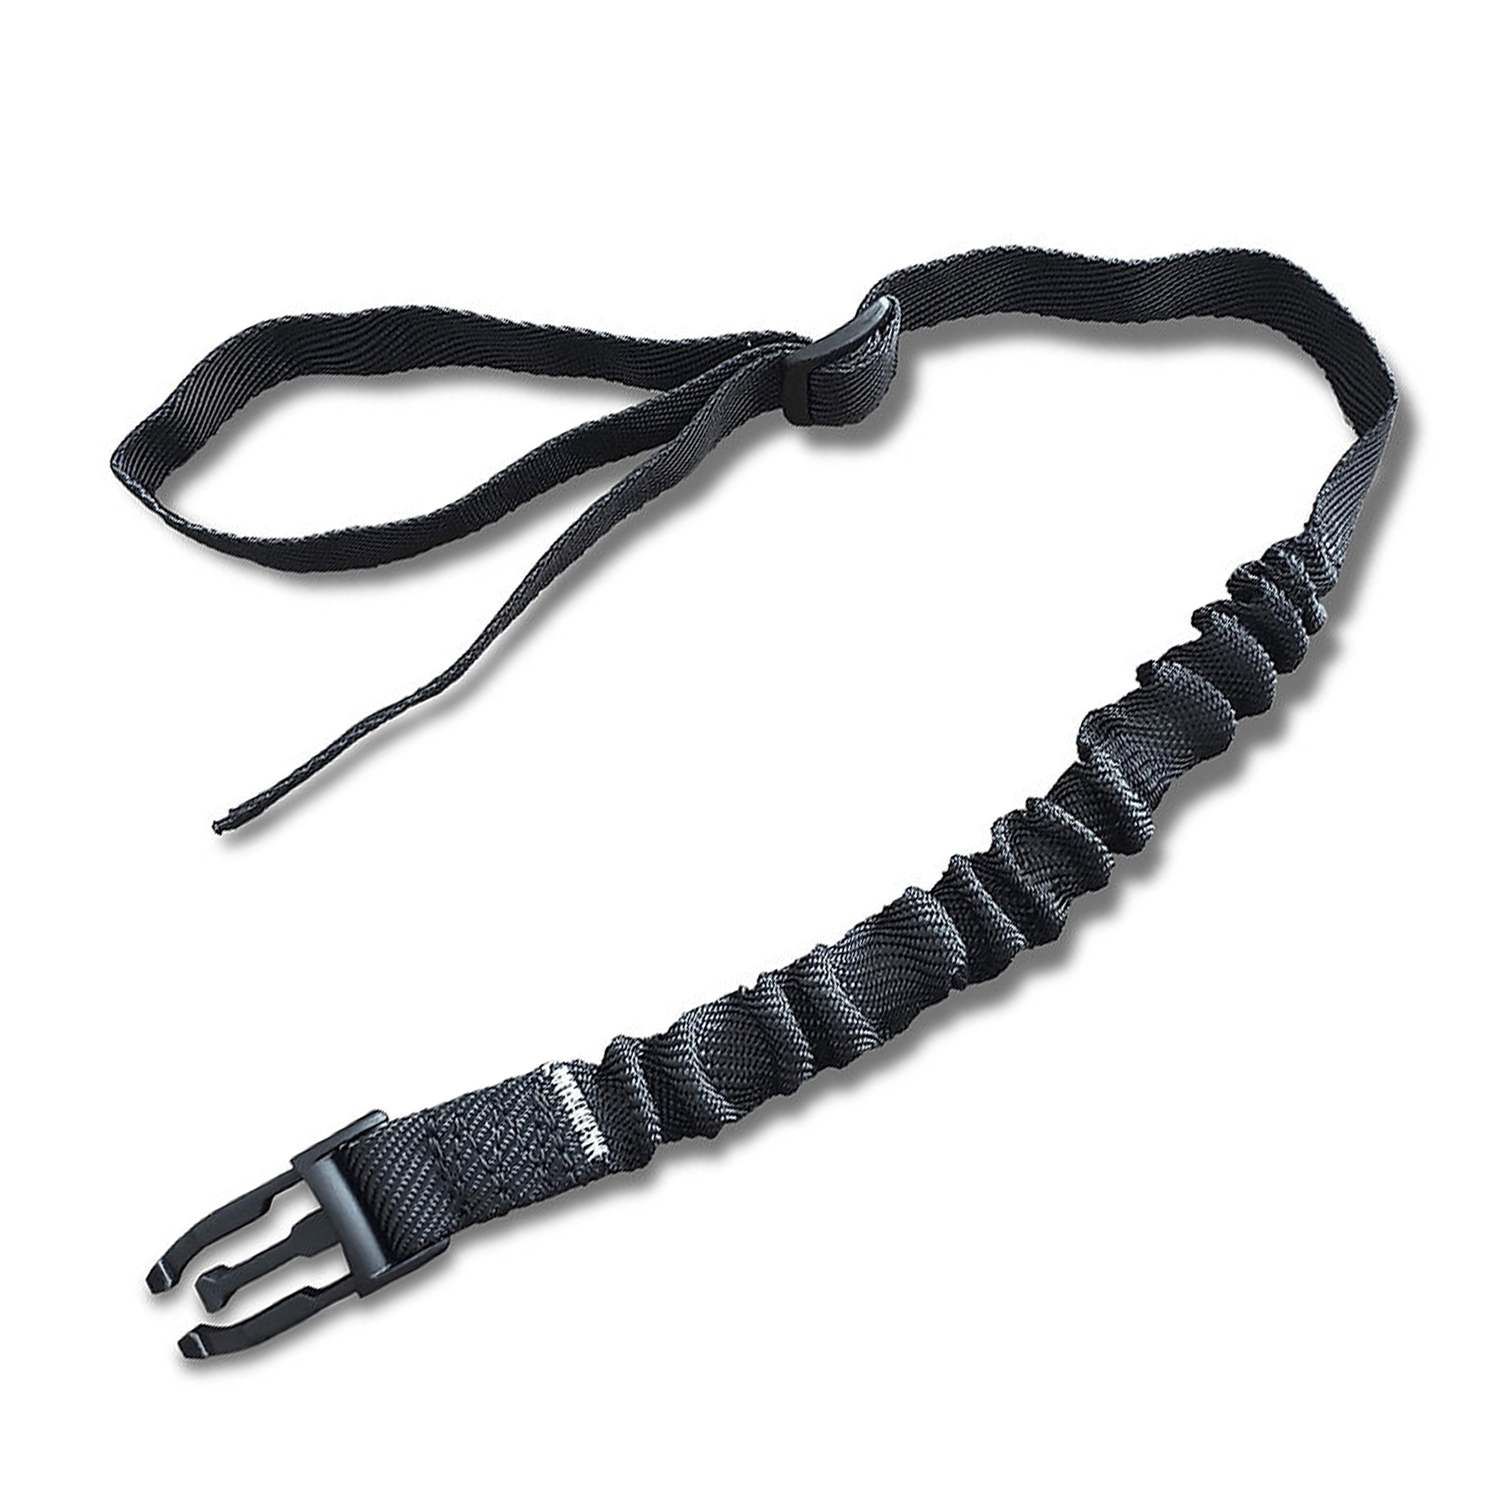 Held Activation Lanyard for Air Vest